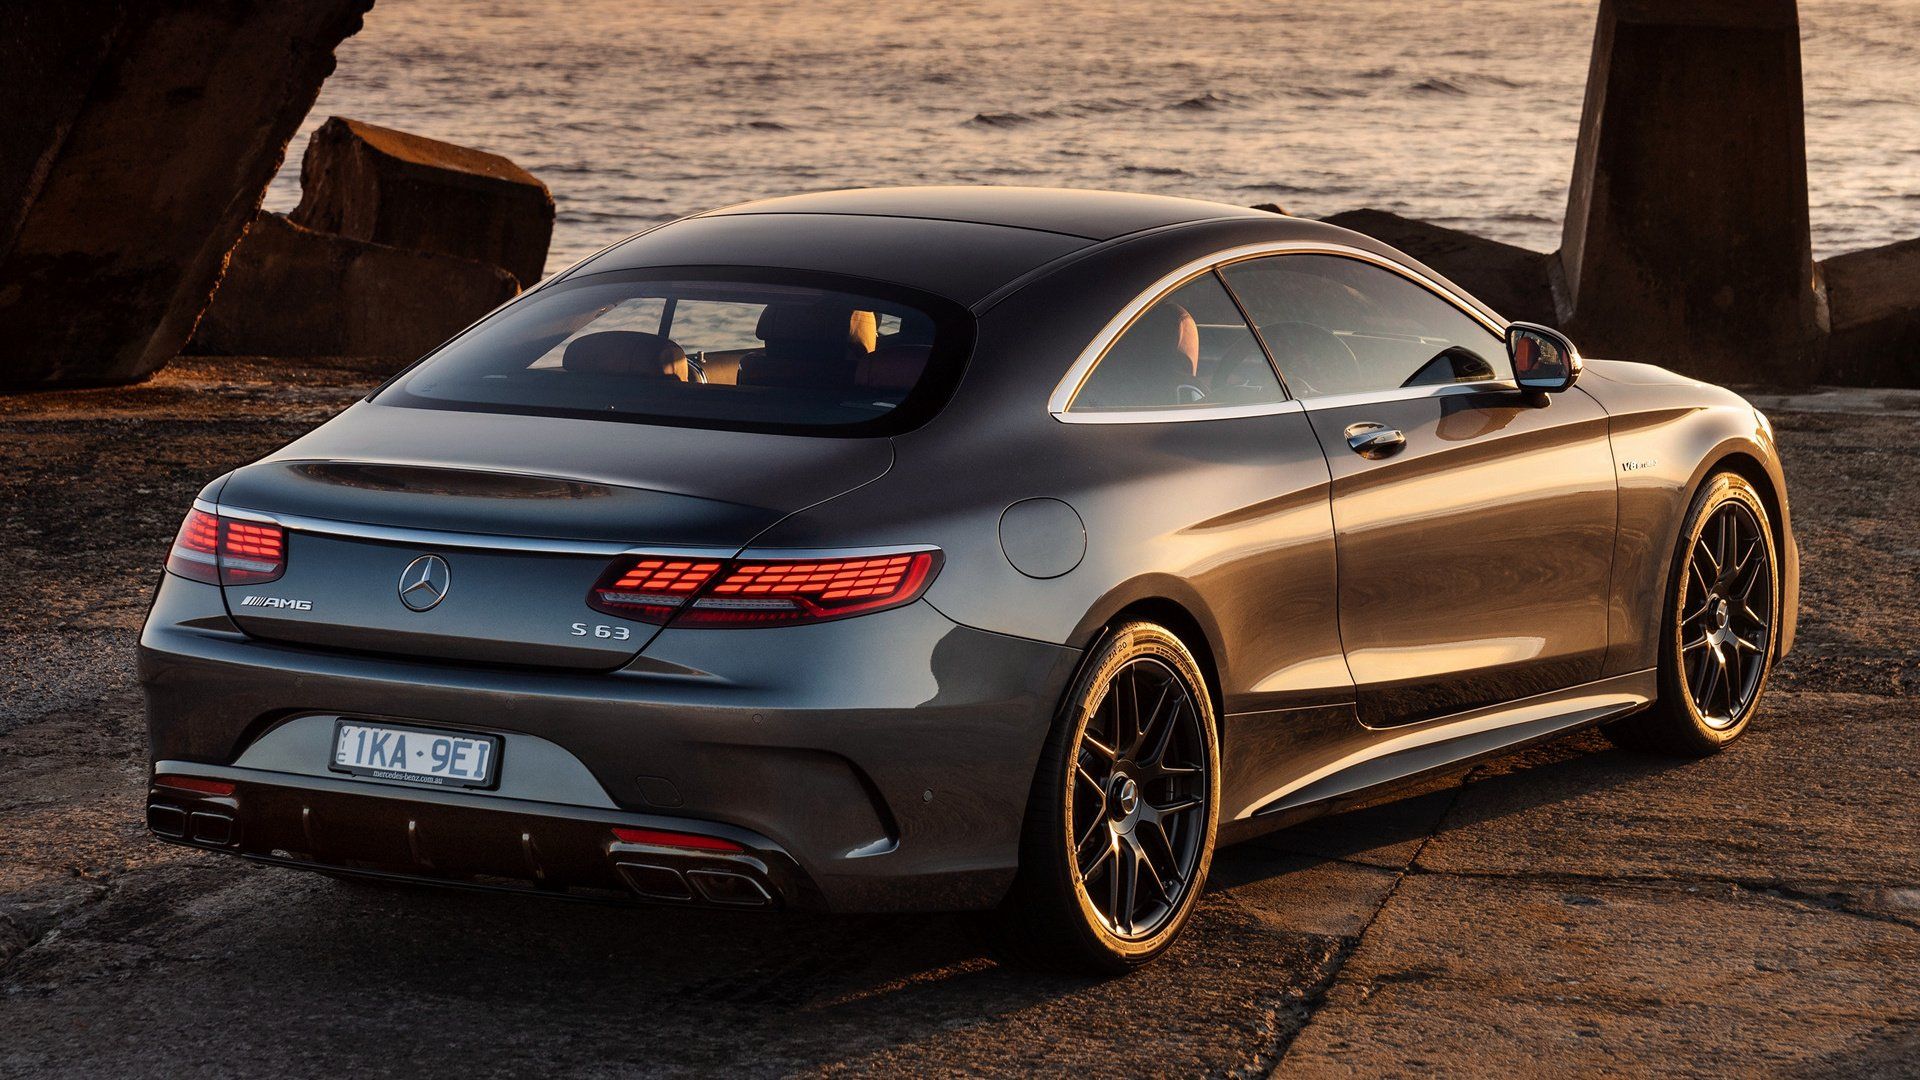 Mercedes AMG S 63 Coupe HD Wallpaper. Background Image